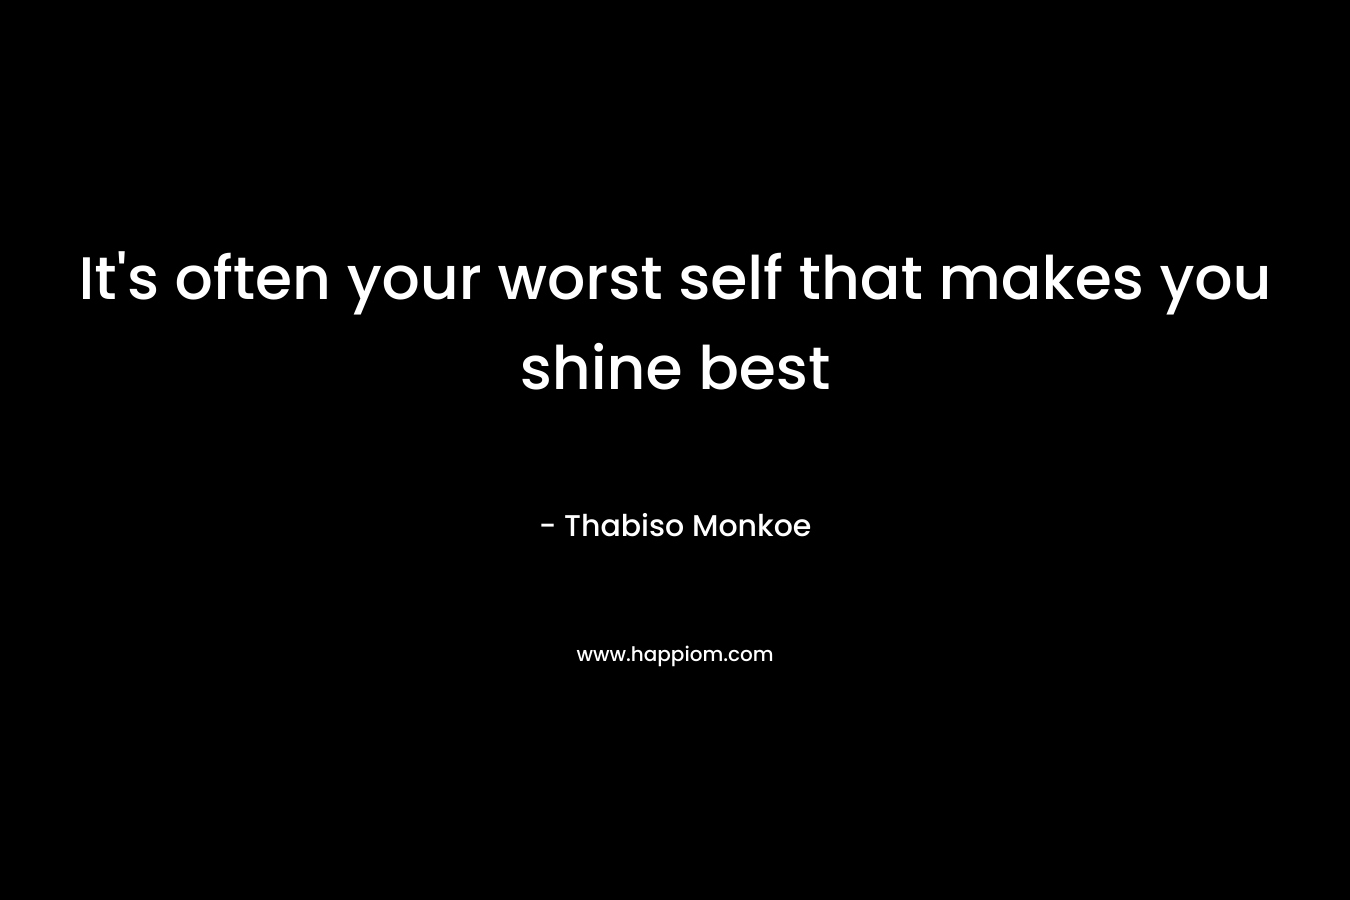 It's often your worst self that makes you shine best